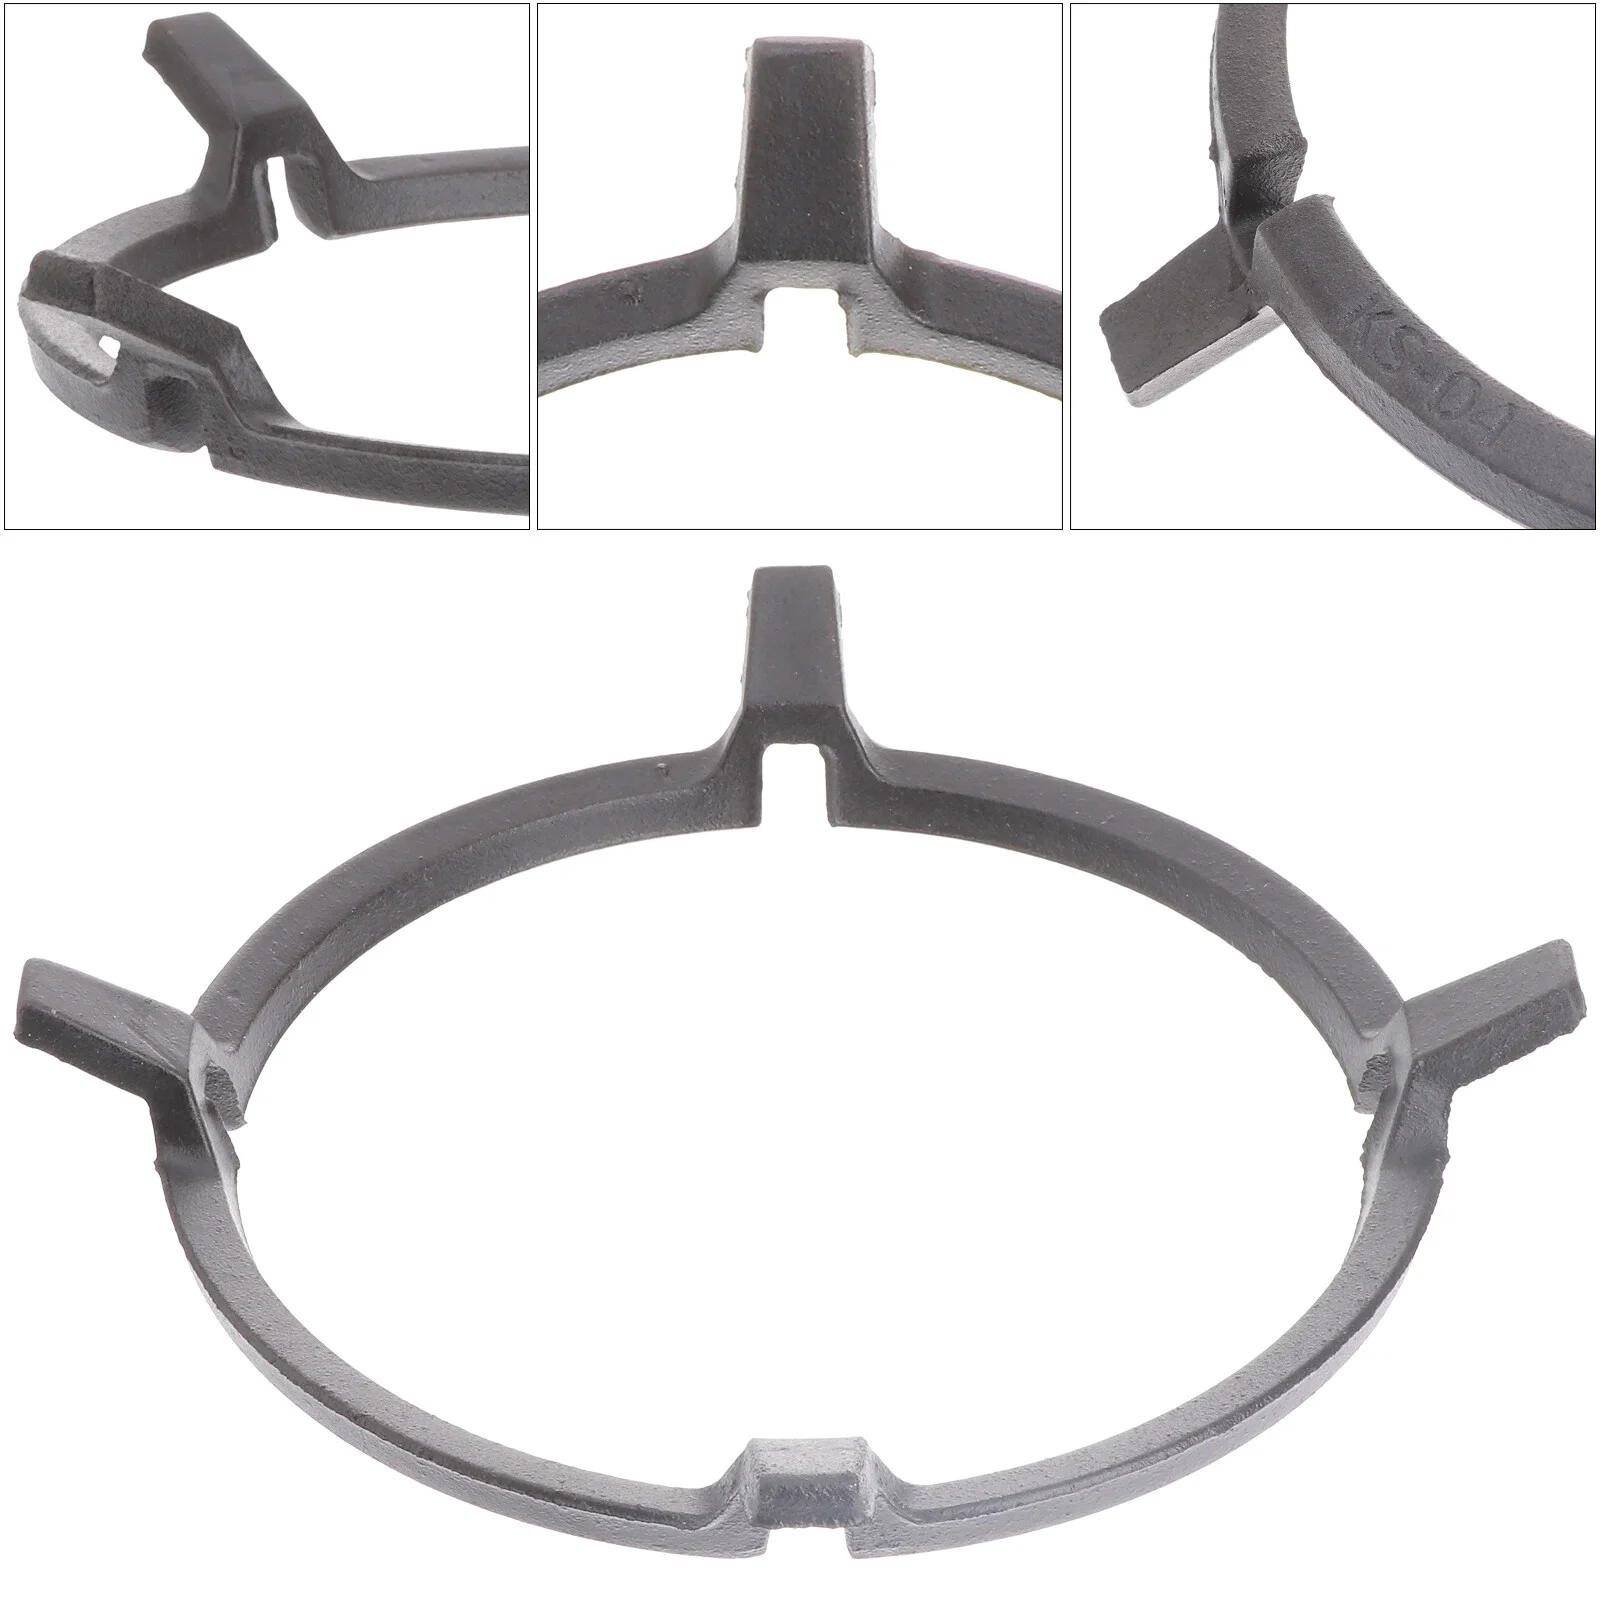 

Wok Ring For Gas Stove Anti-skid Milk Pot Holder Gas Stove Stand Supply